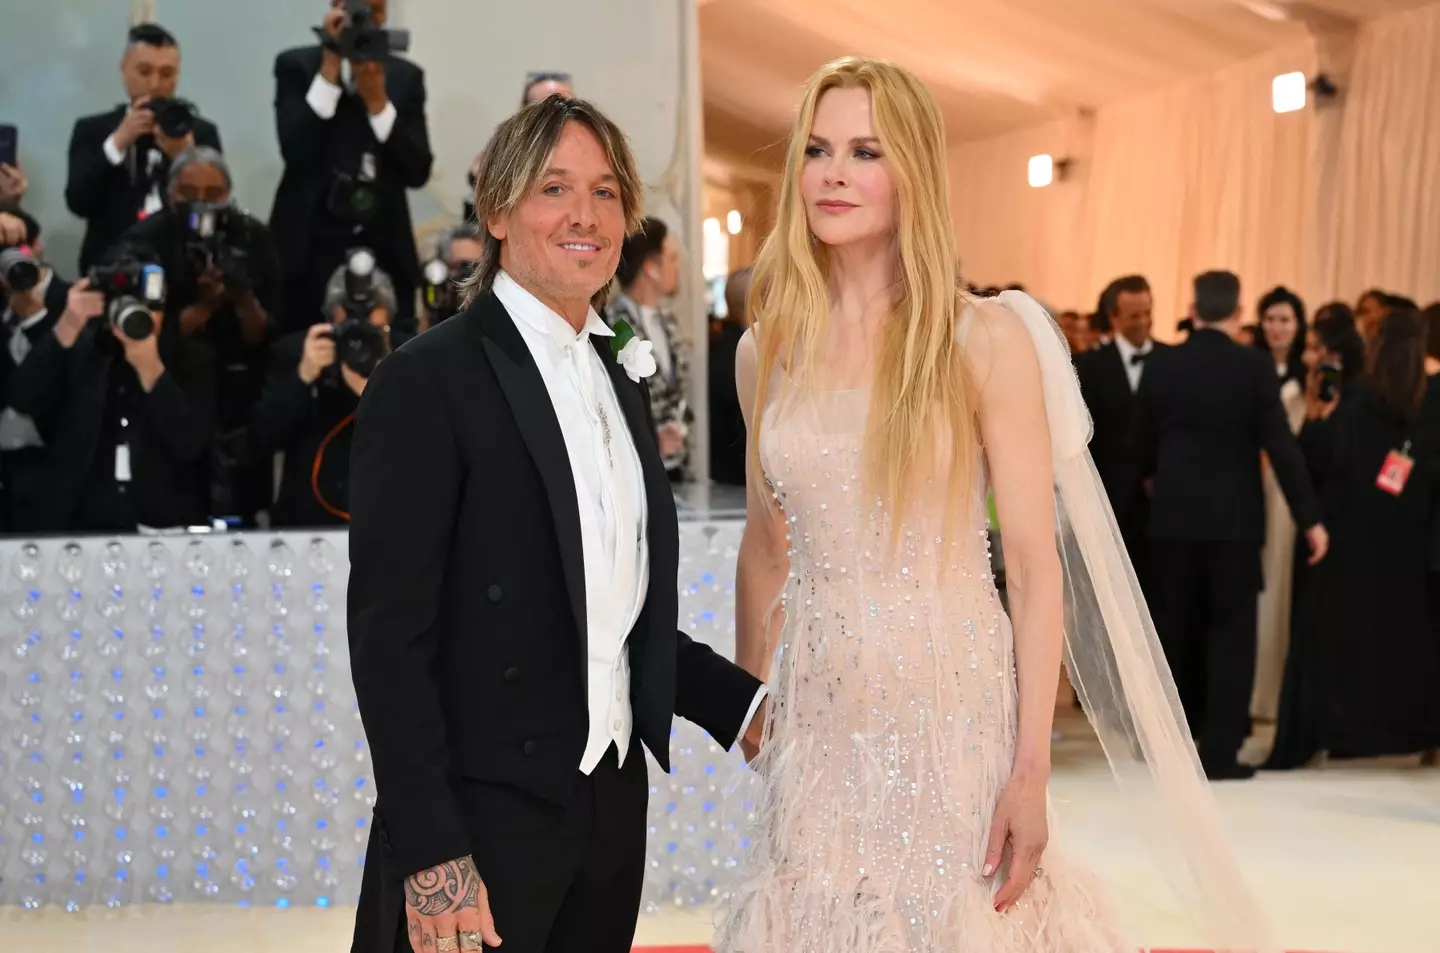 Nicole Kidman is now married to Keith Urban. (ANGELA WEISS/AFP via Getty Images)